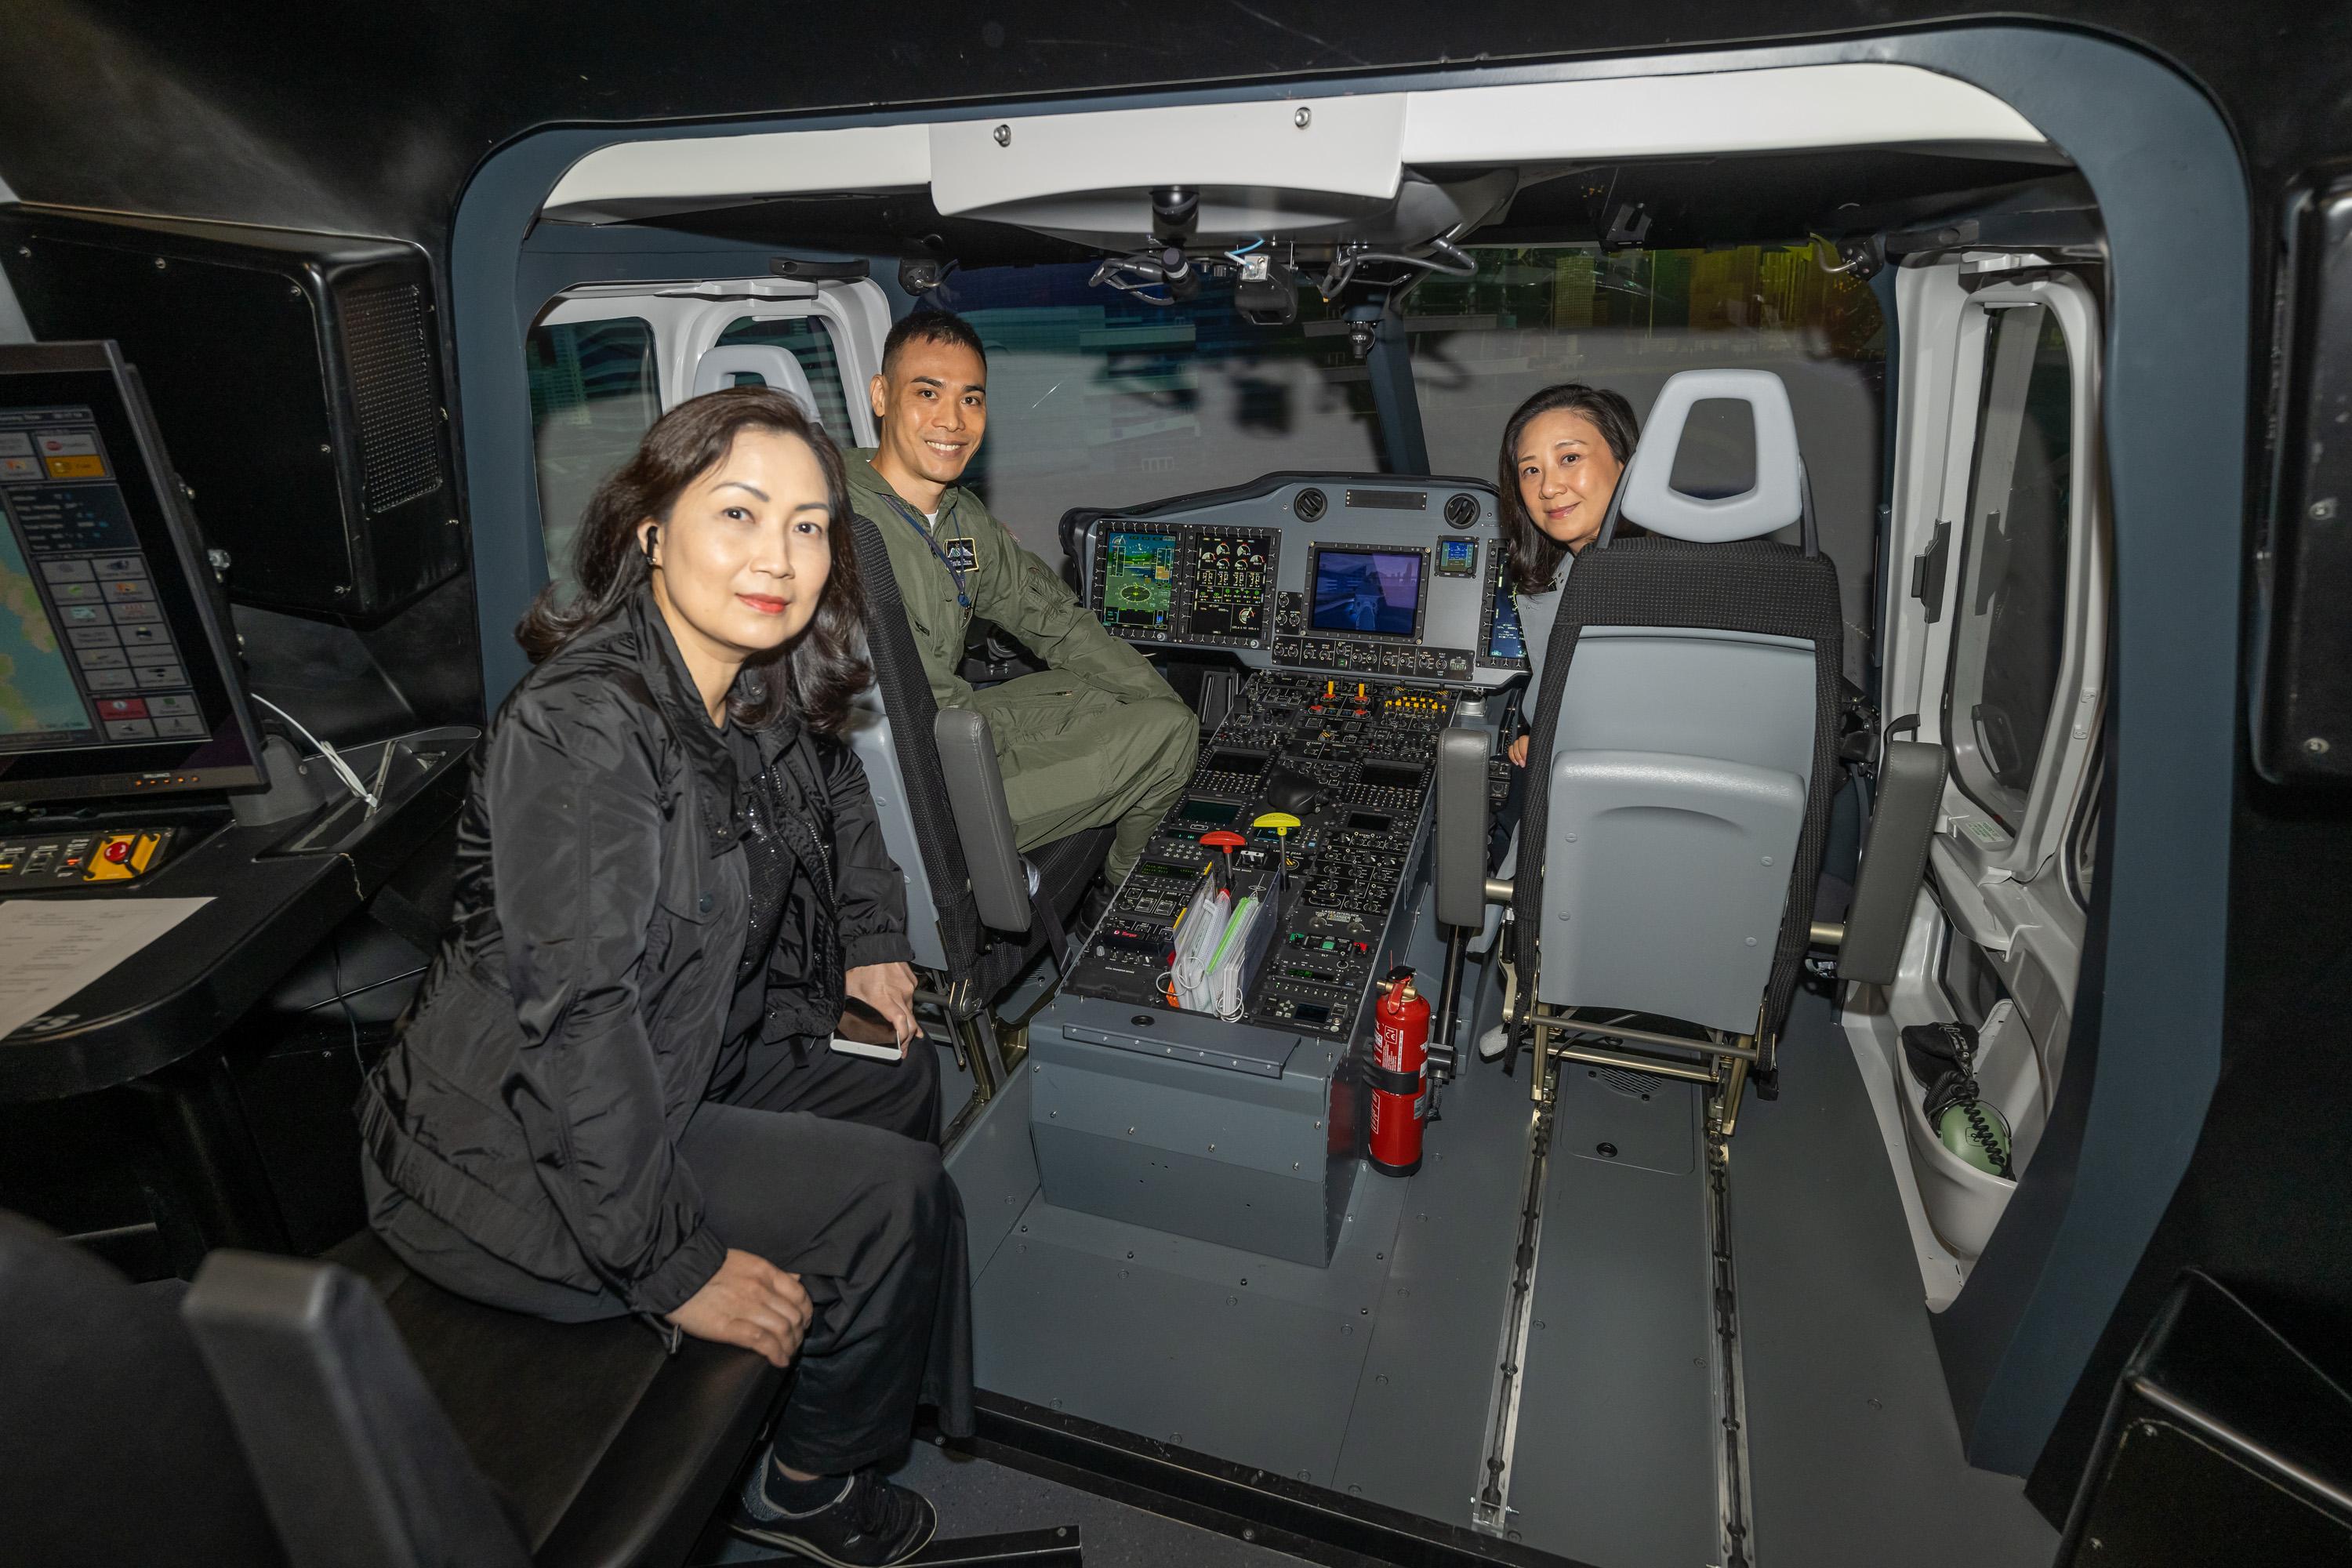 The Legislative Council (LegCo) Panel on Security visited facilities of two disciplined services today (May 9). Photo shows LegCo Members experiencing firsthand the high-fidelity flying conditions in the helicopter flight simulator.